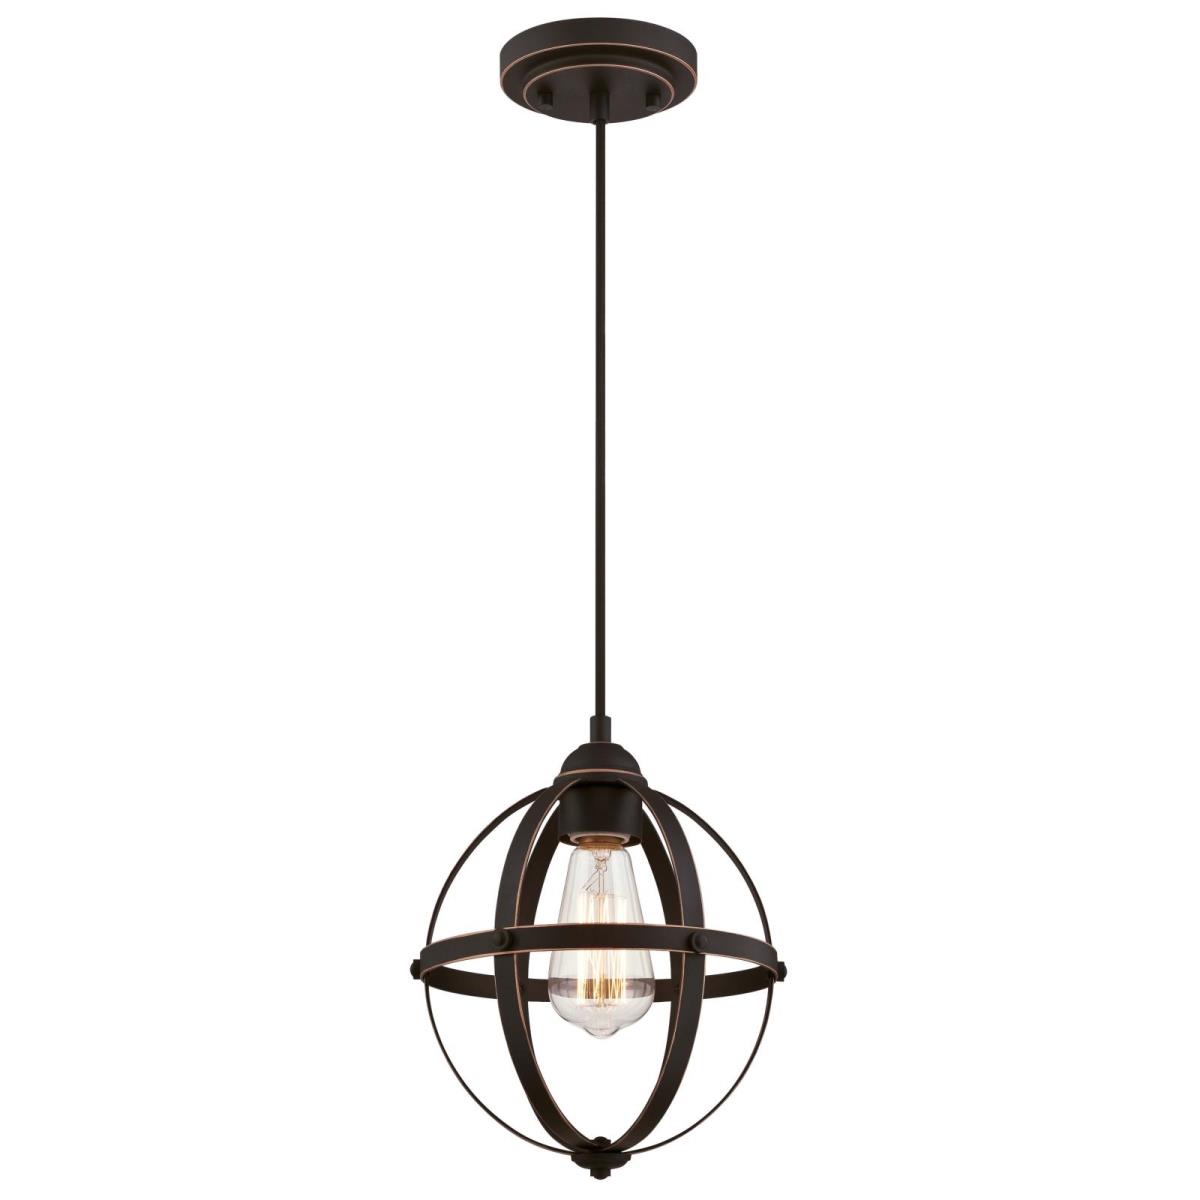 1 Light Mini Pendant Oil Rubbed Bronze Finish with Highlights